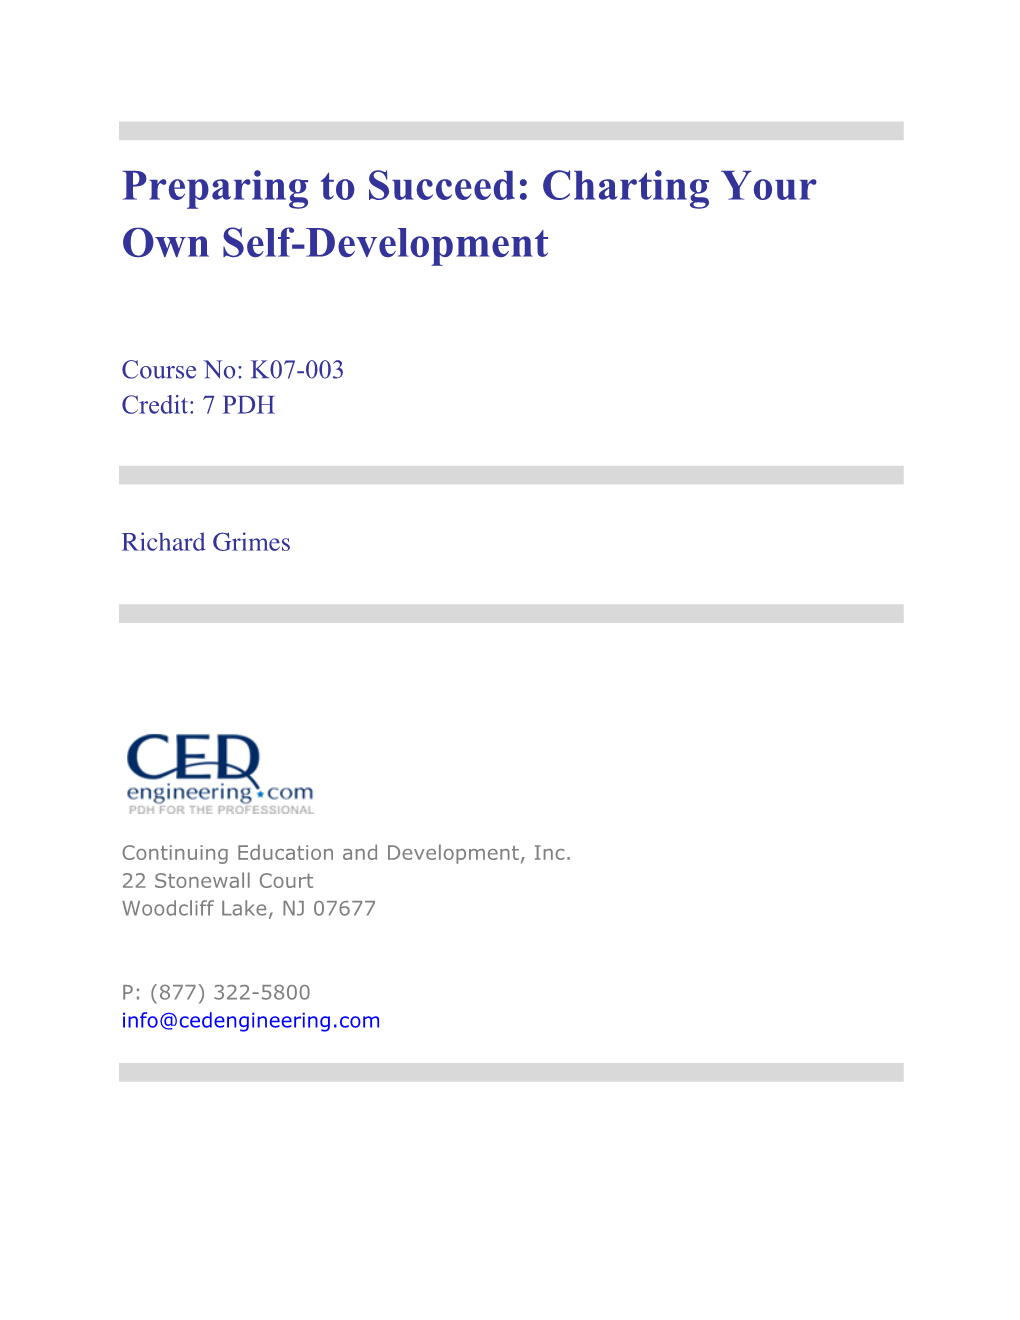 Preparing to Succeed: Charting Your Own Self-Development